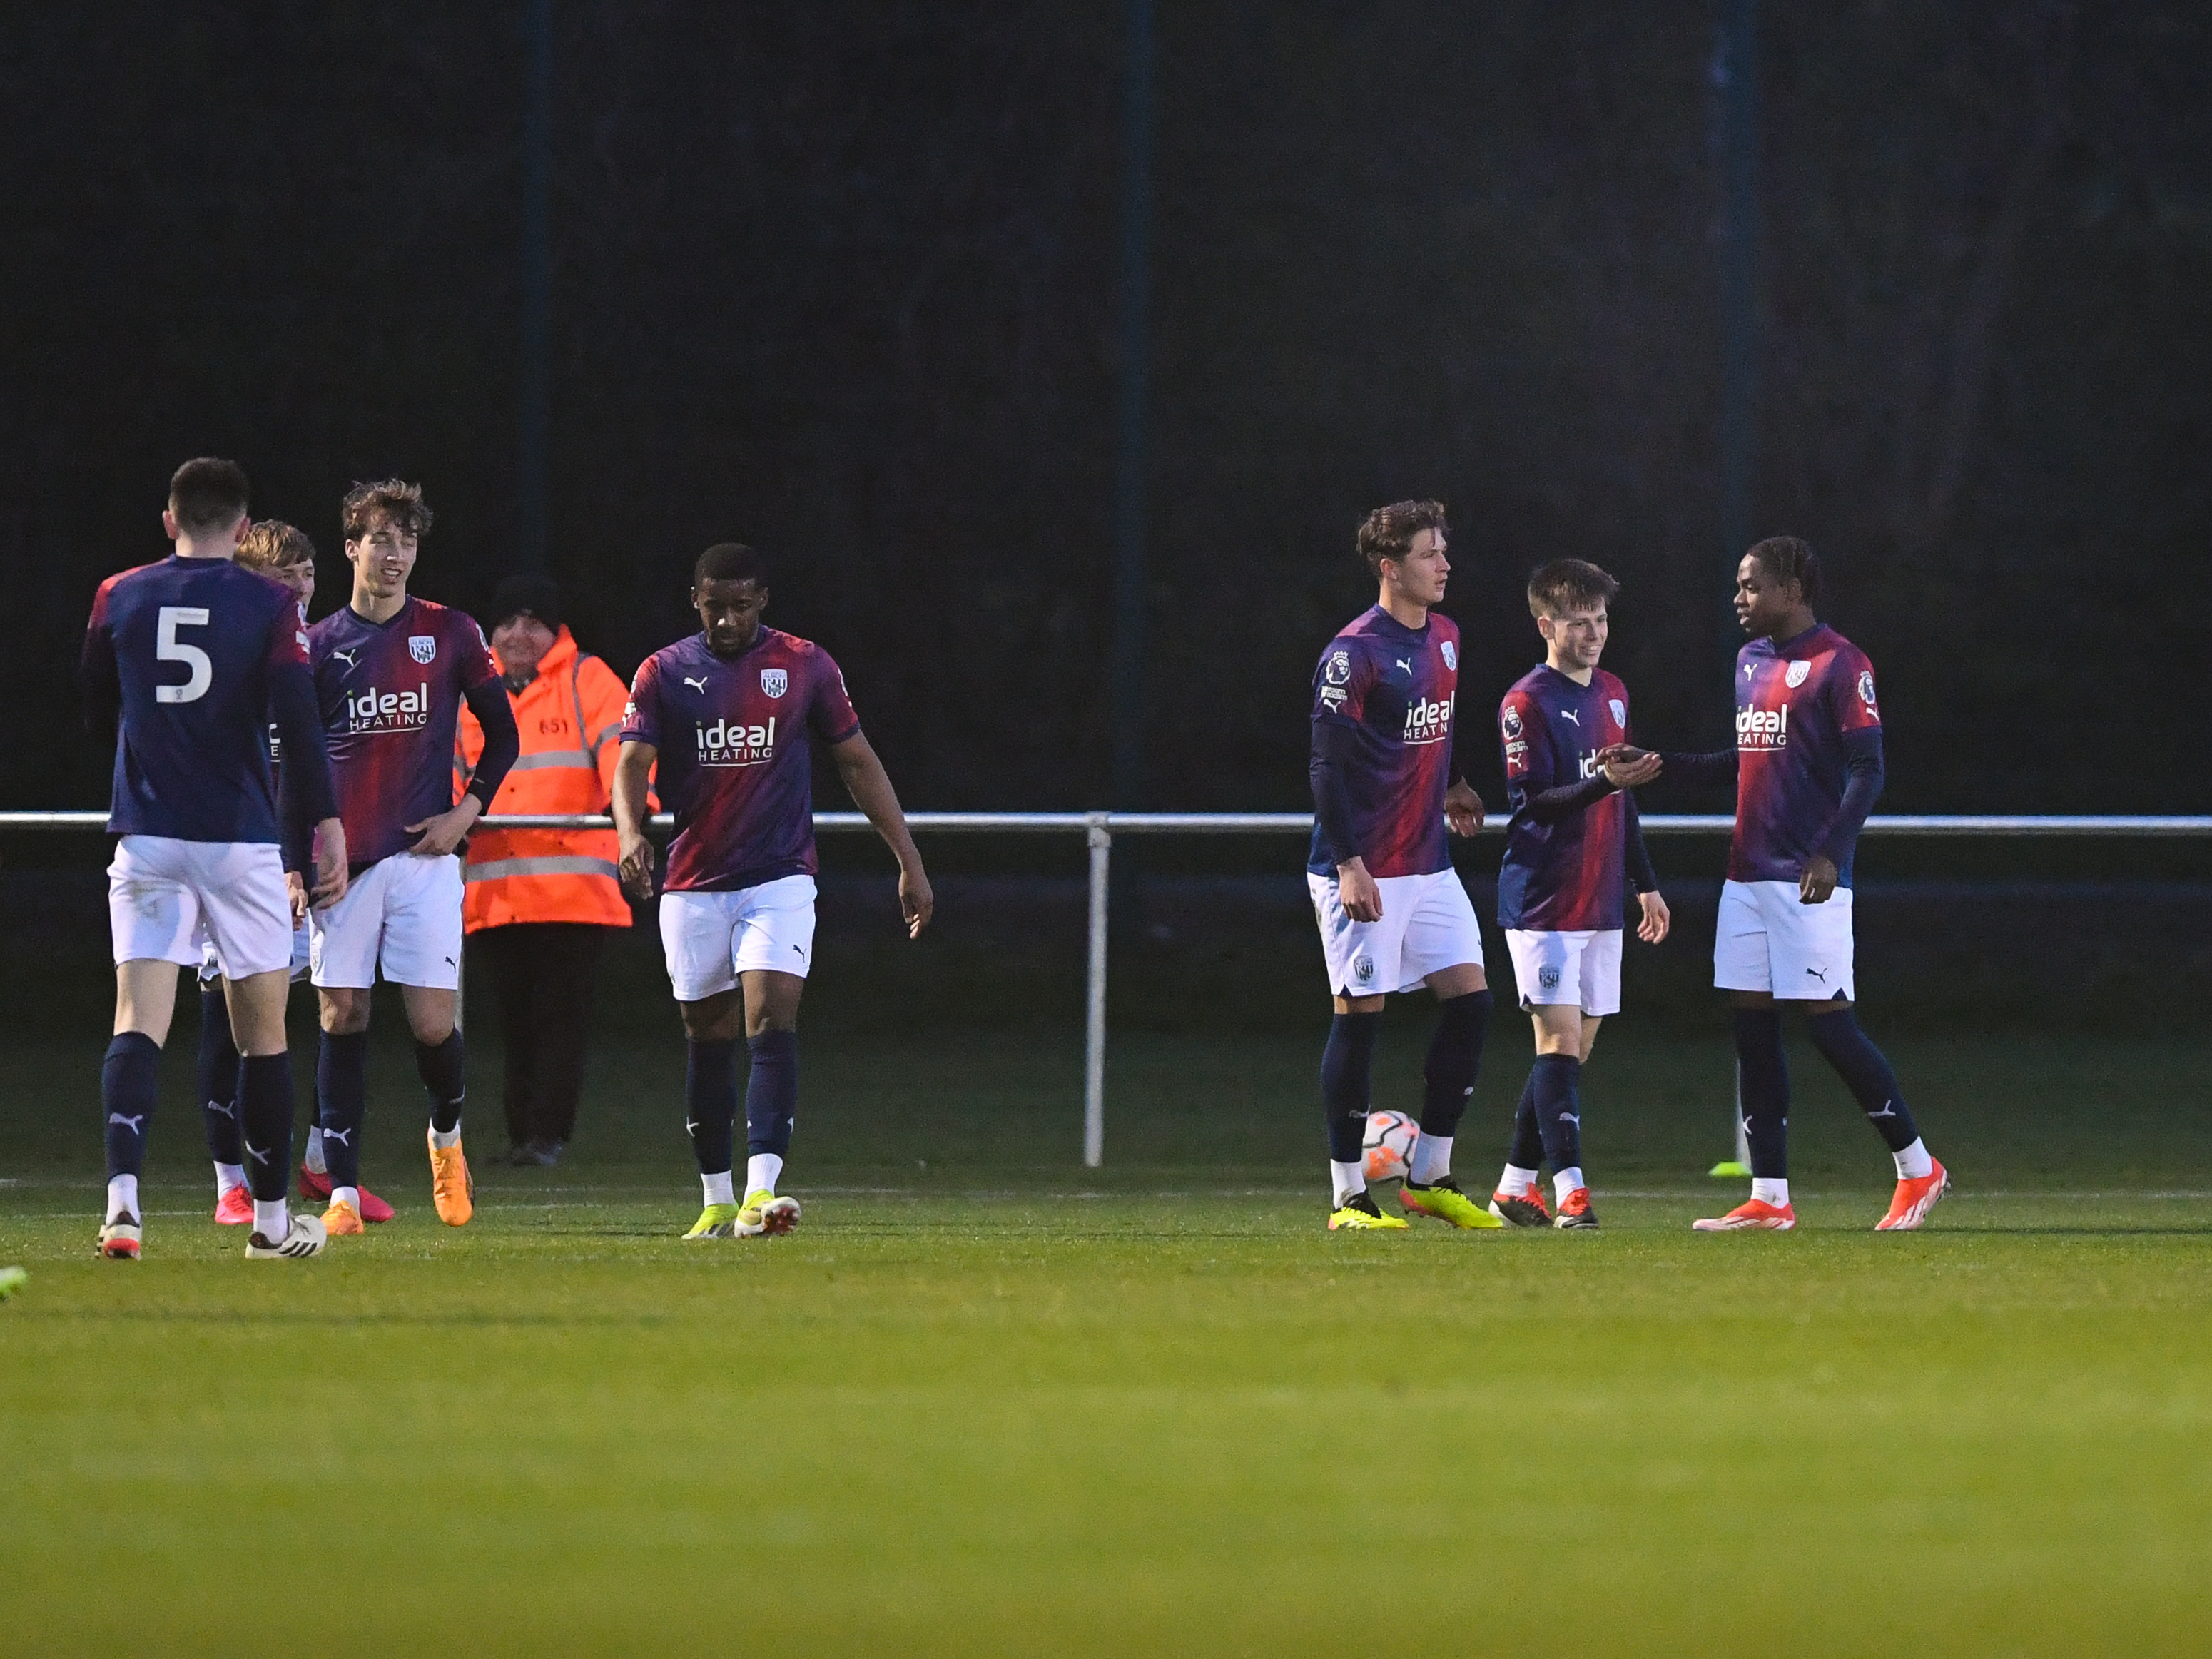 A photo of Fenton Heard and Albion's PL2 team, wearing the red and blue 23/24 away kit, celebrating a goal against Newcastle